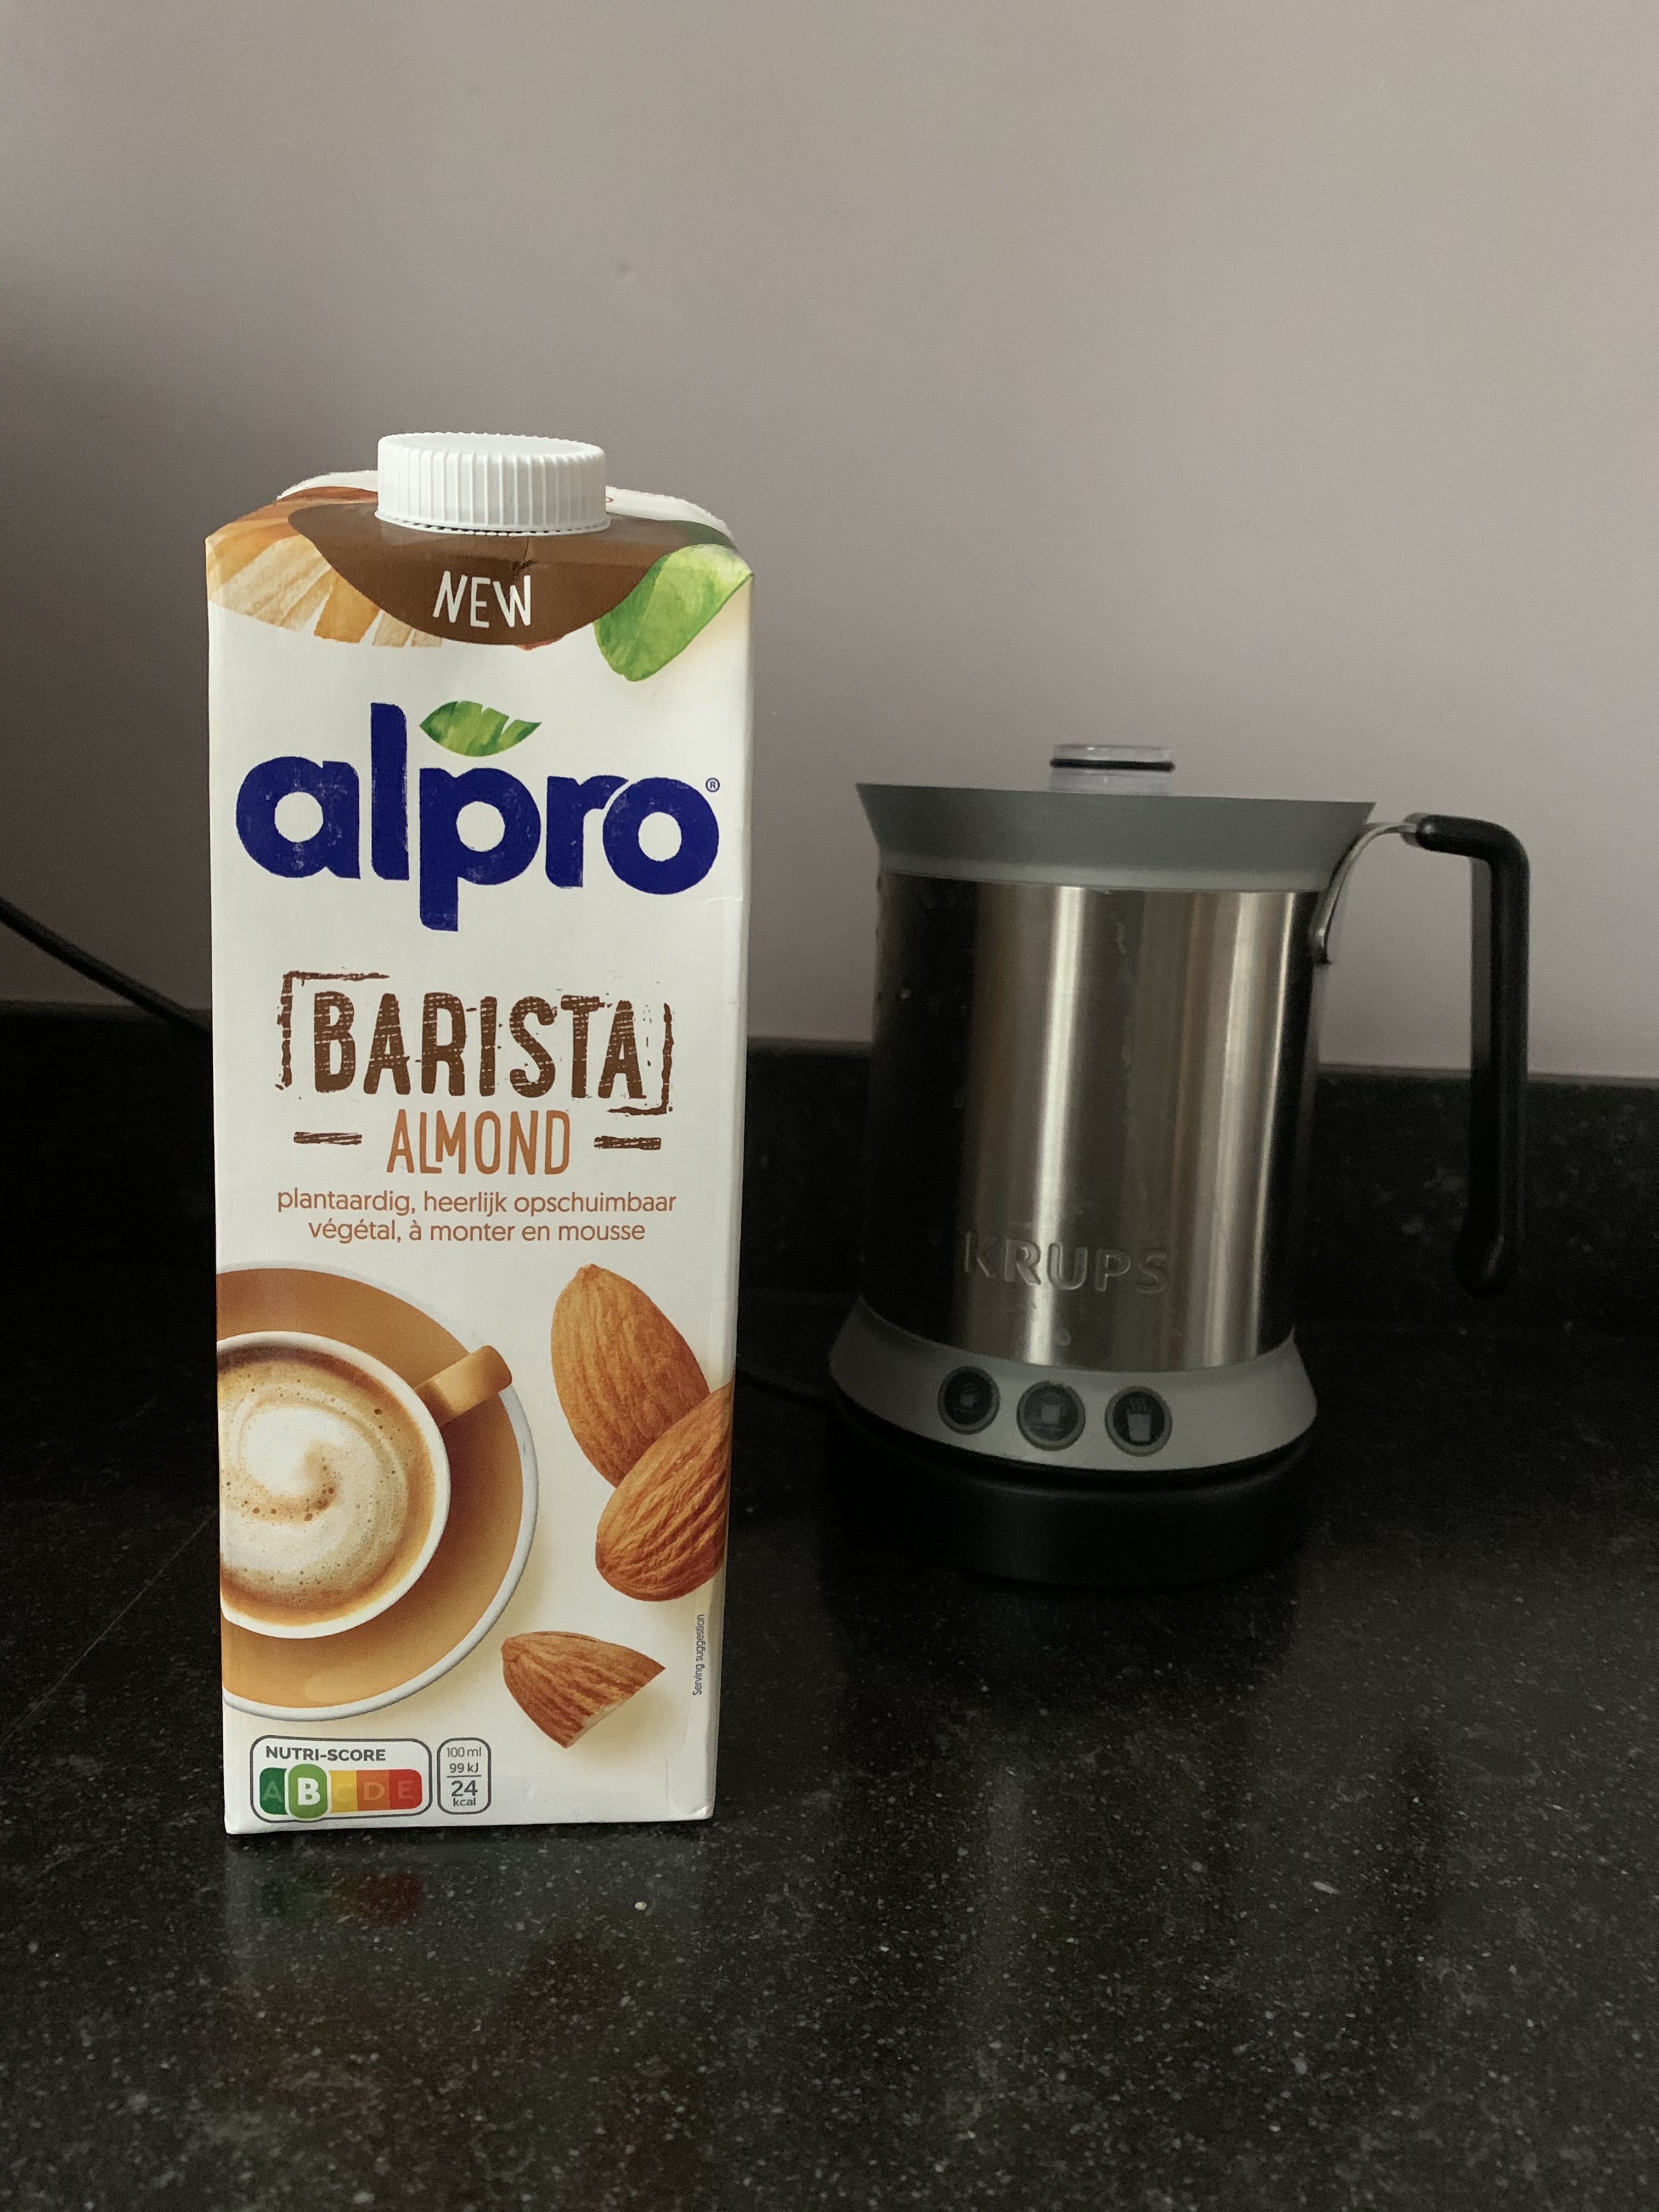 REVIEW: Alpro barista almond, does it really foam well? –